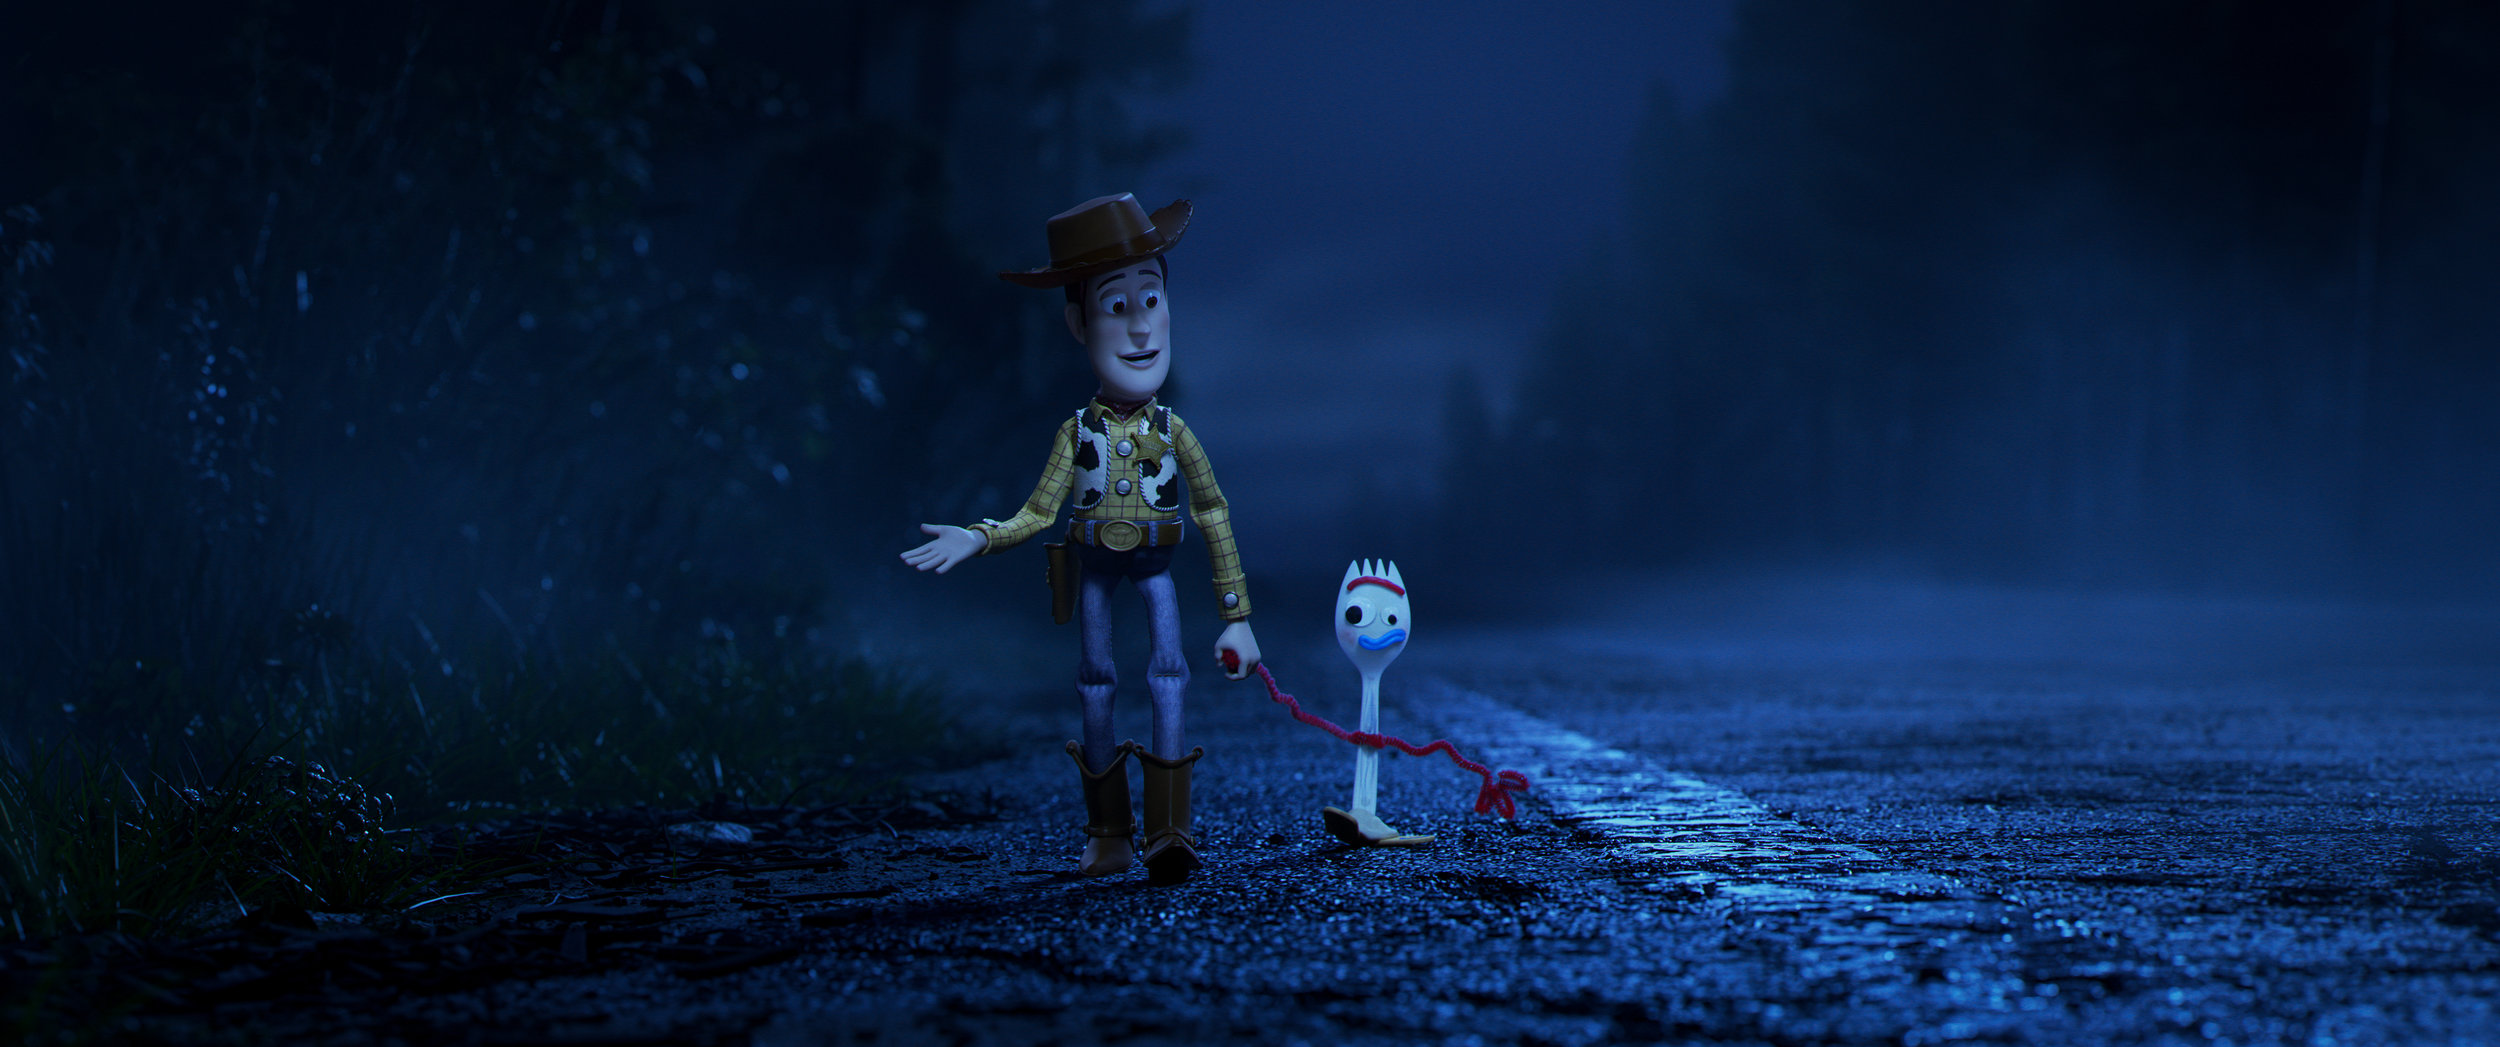 Four times the 'Toy Story' movies made us cry